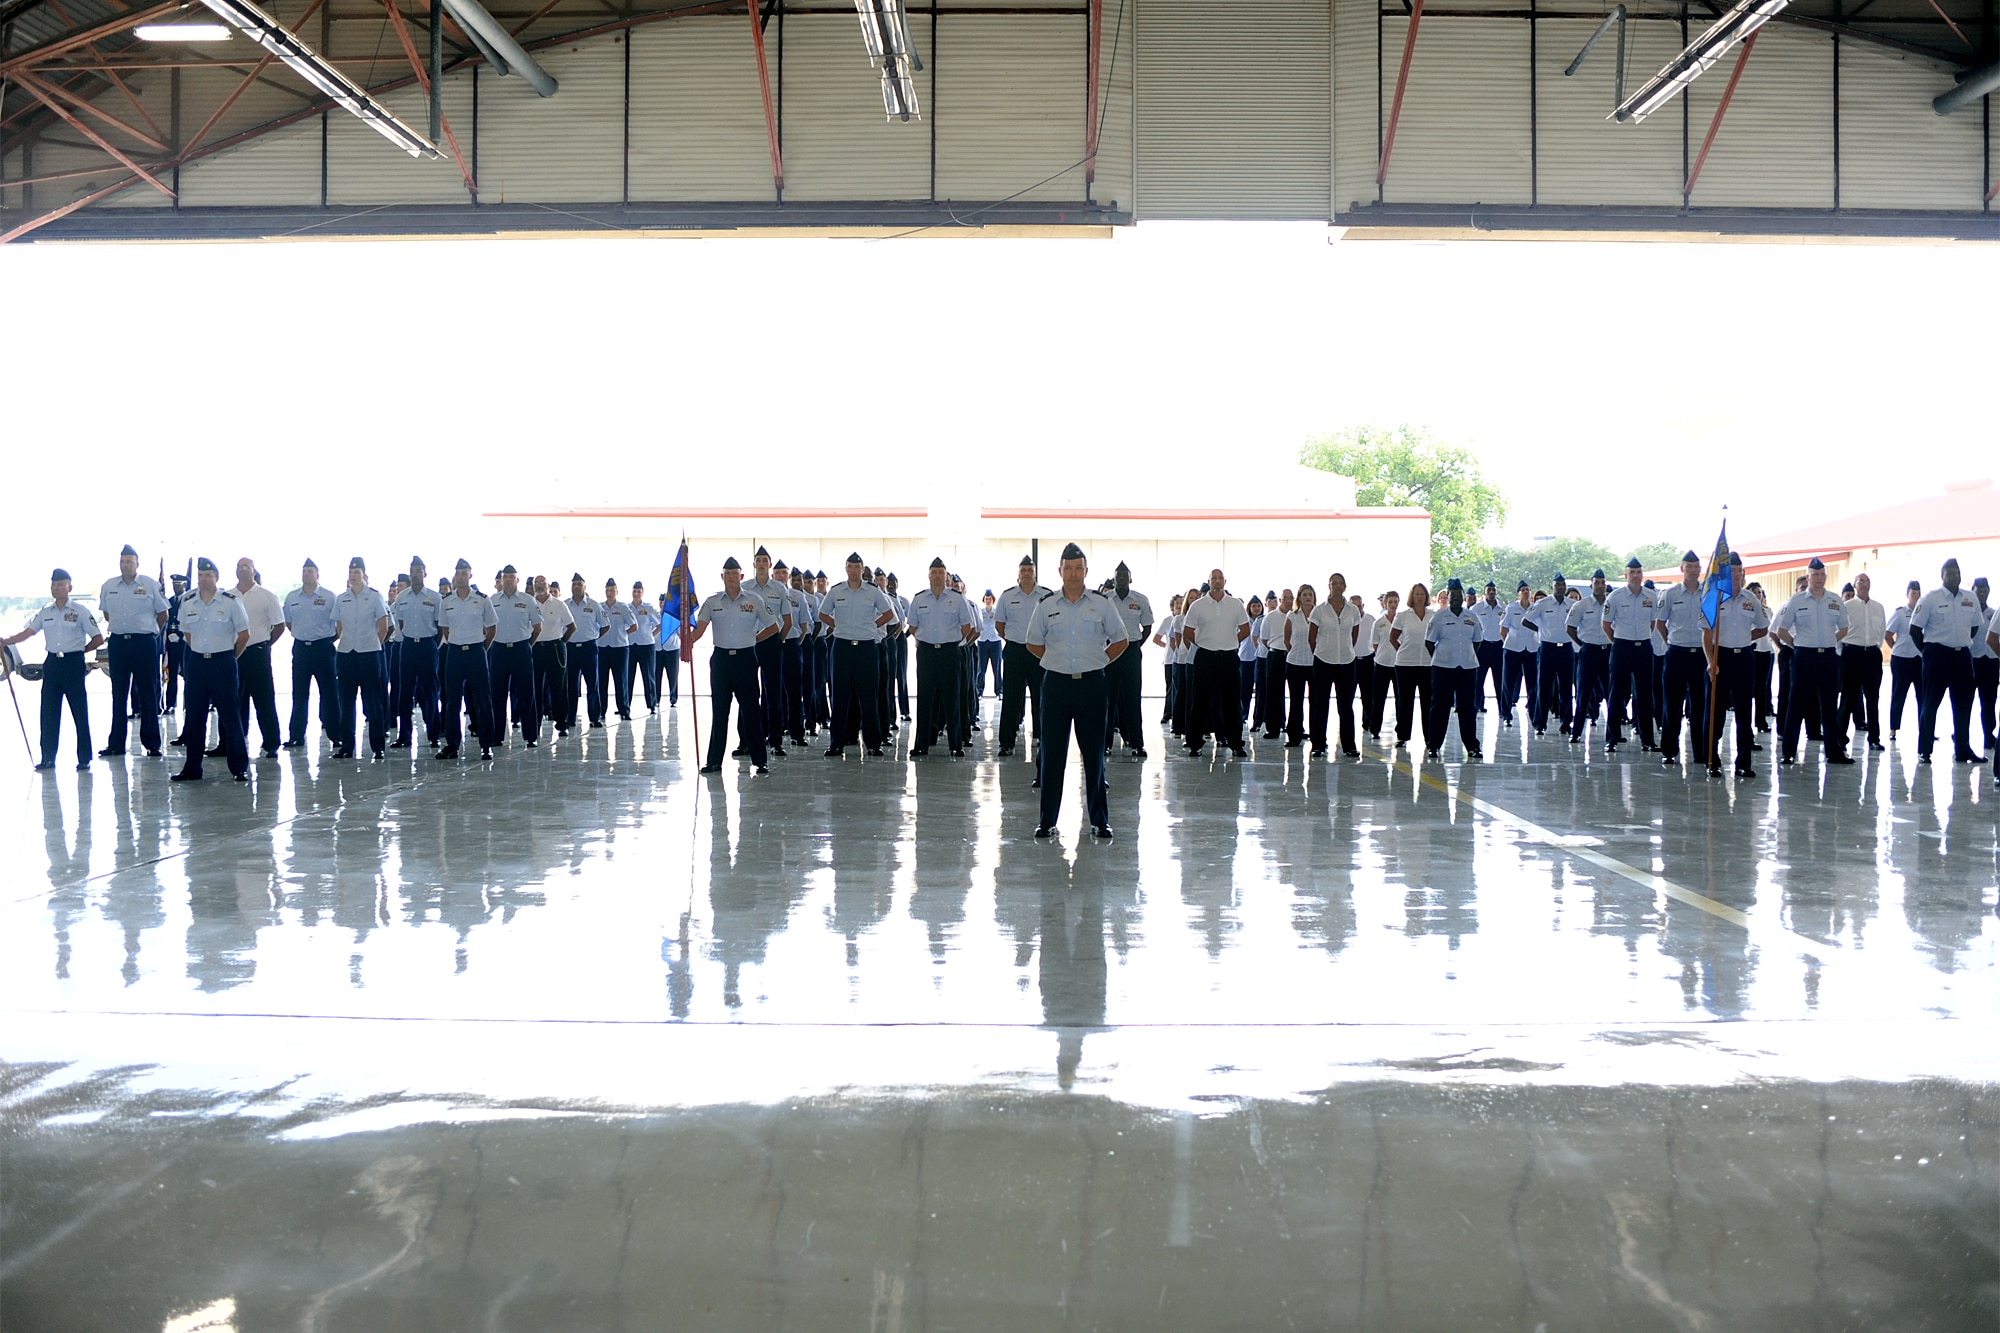 Airmen from the new Air Force Personnel Center stand in formation during the Air Force personnel, manpower and services inactivation and consolidation ceremony July 17 at Randolph Air Force Base. Air Force Deputy Chief of Staff for Manpower, Personnel and Services Lt. Gen. Darrell D. Jones inactivated the Air Force manpower and Air Force services agencies, designating them as AFPC directorates (U.S. Air Force photo/Ben Faske)